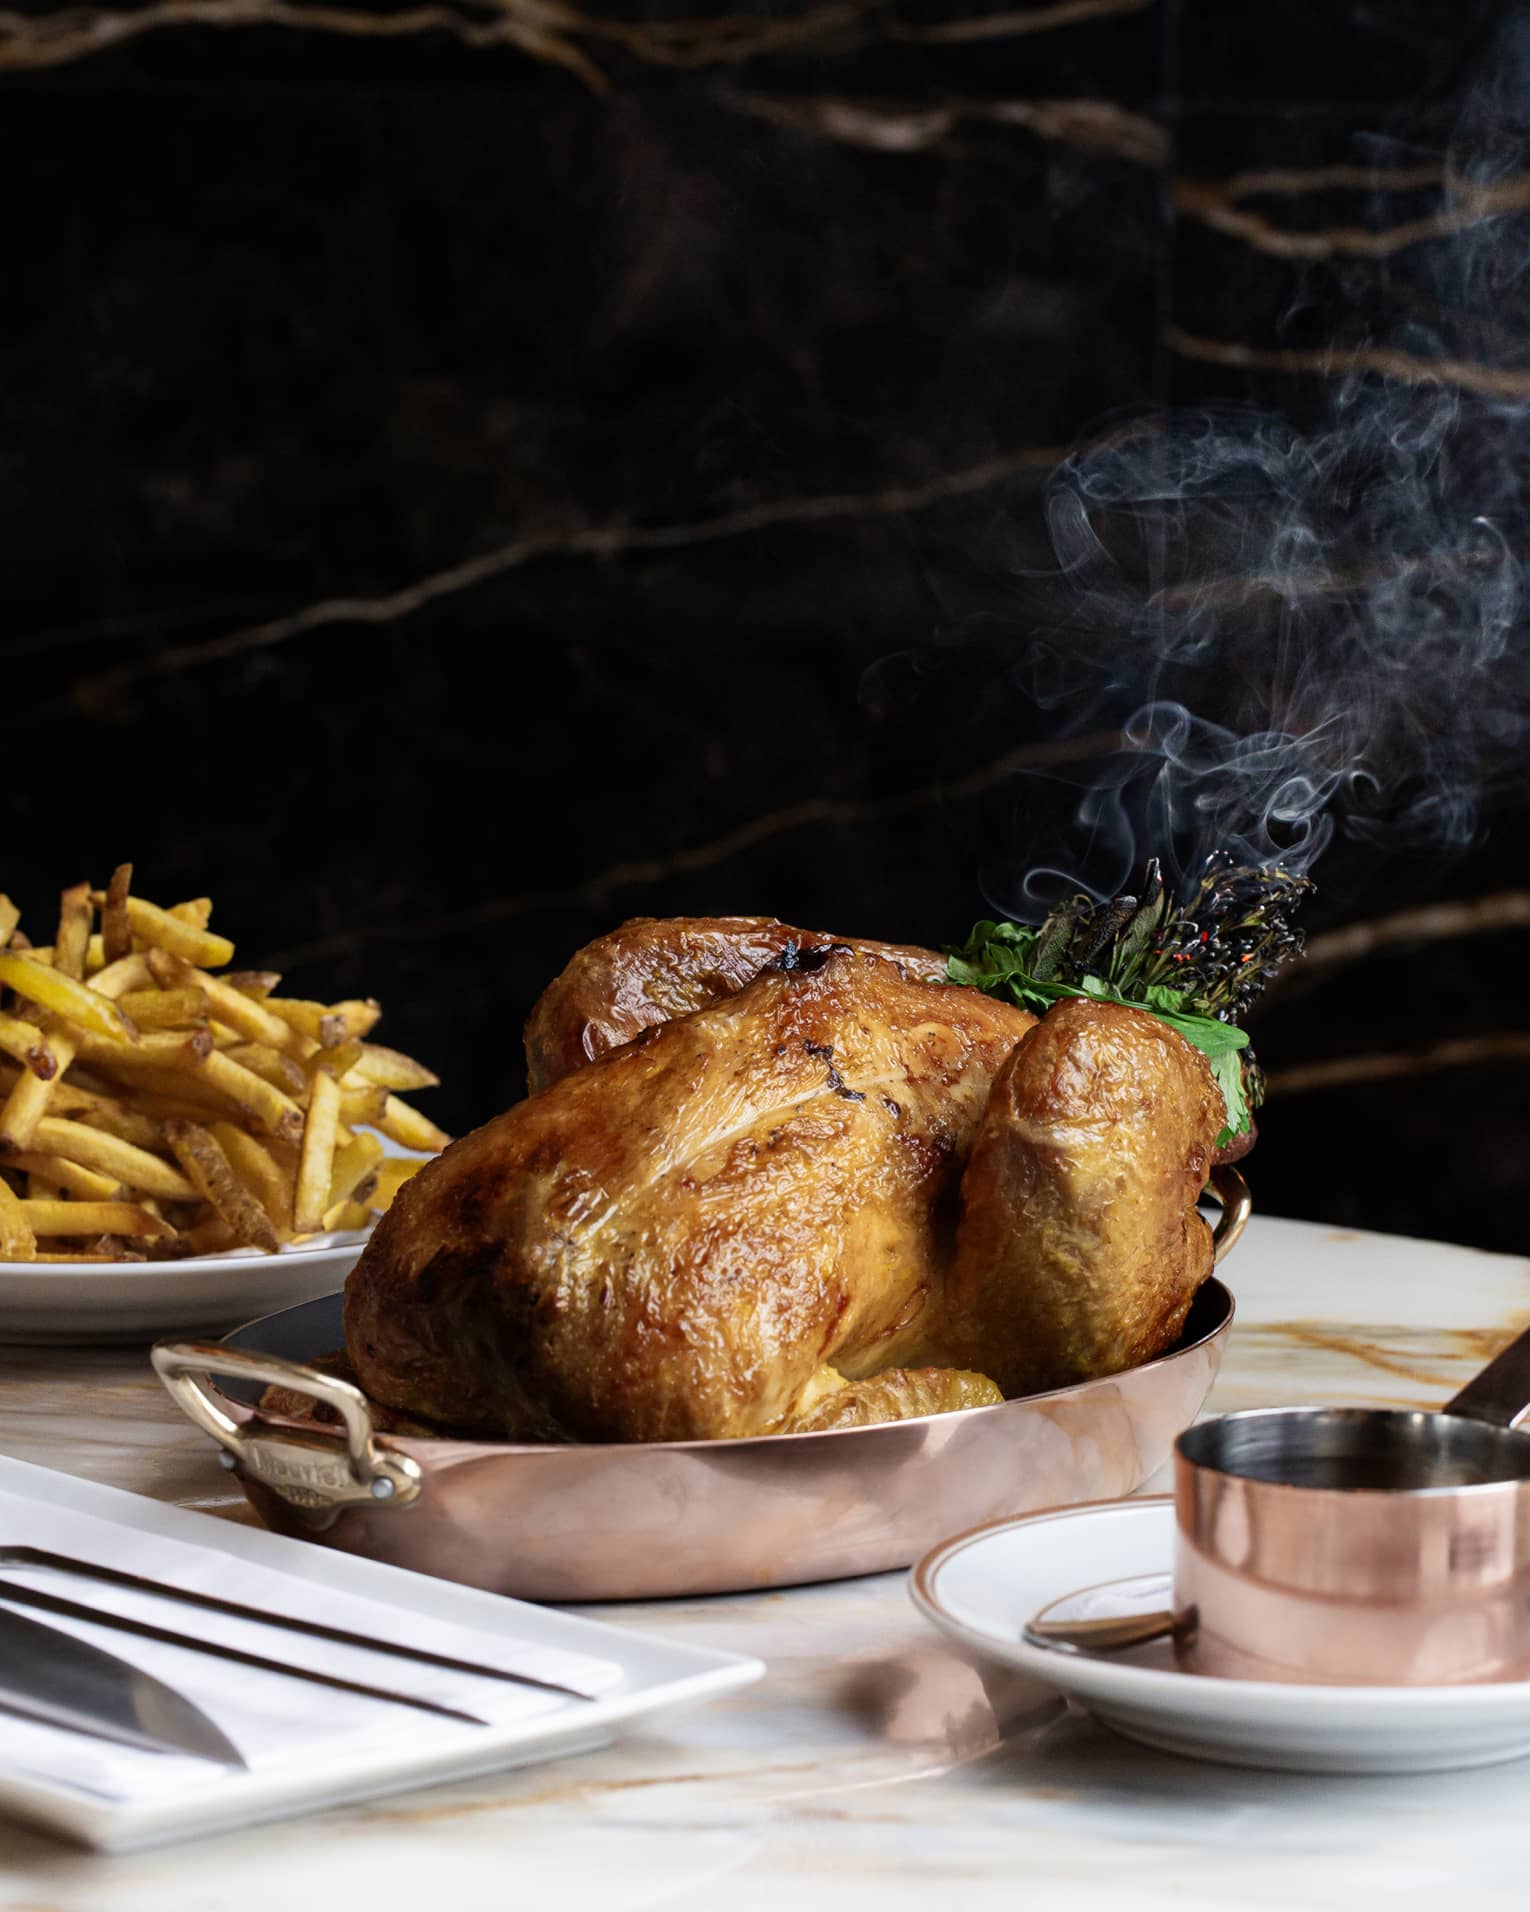 Golden brown whole roasted turkey in copper chafing dish beside plate mounded with French fries